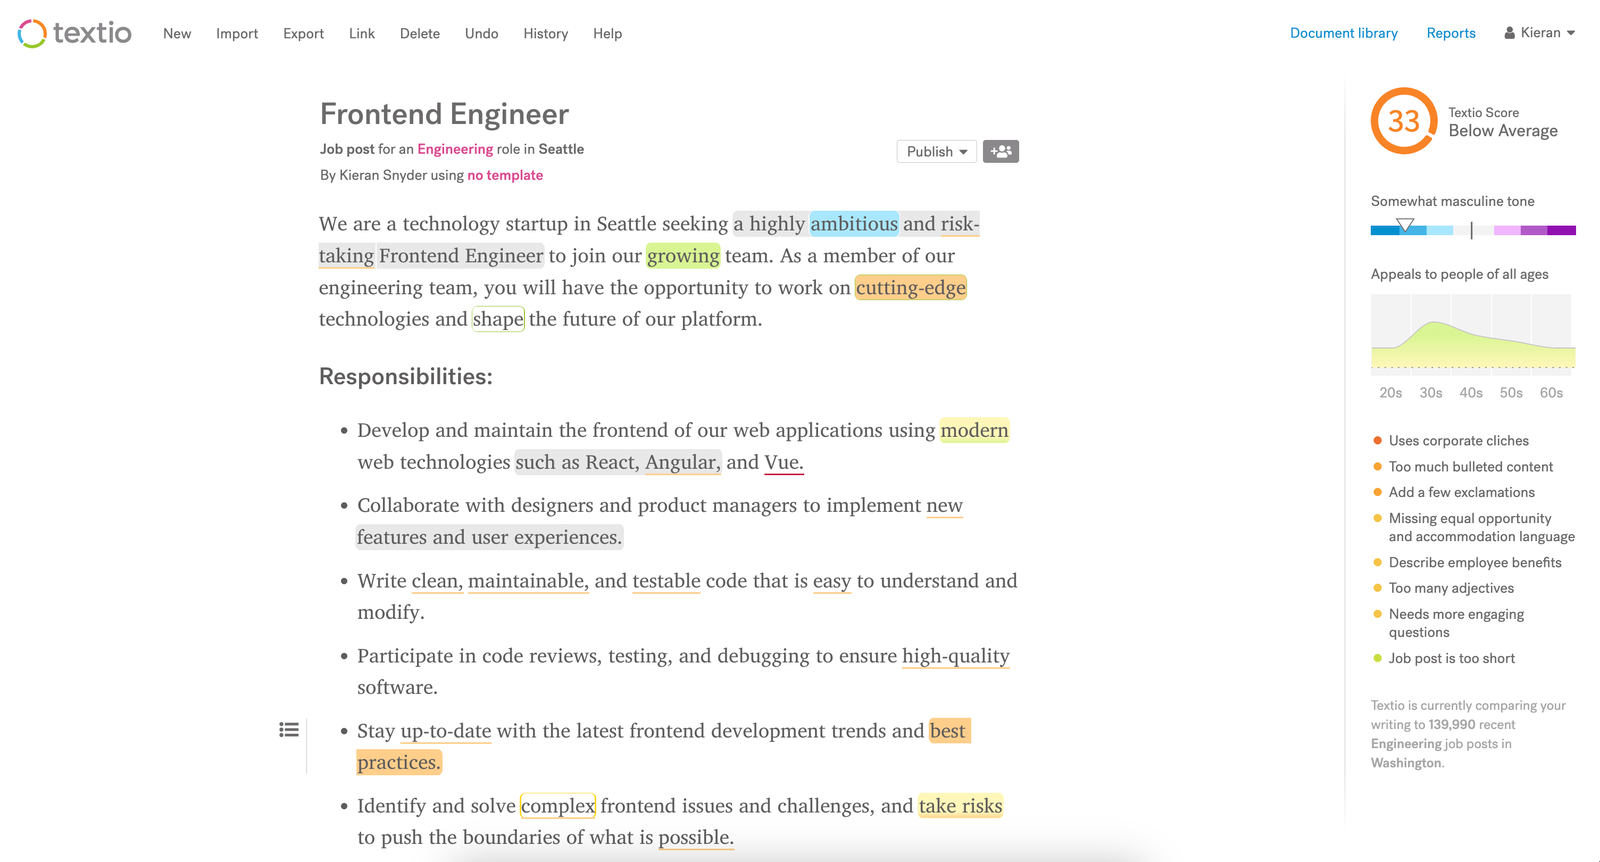 Textio’s analysis of ChatGPT’s frontend engineer job post